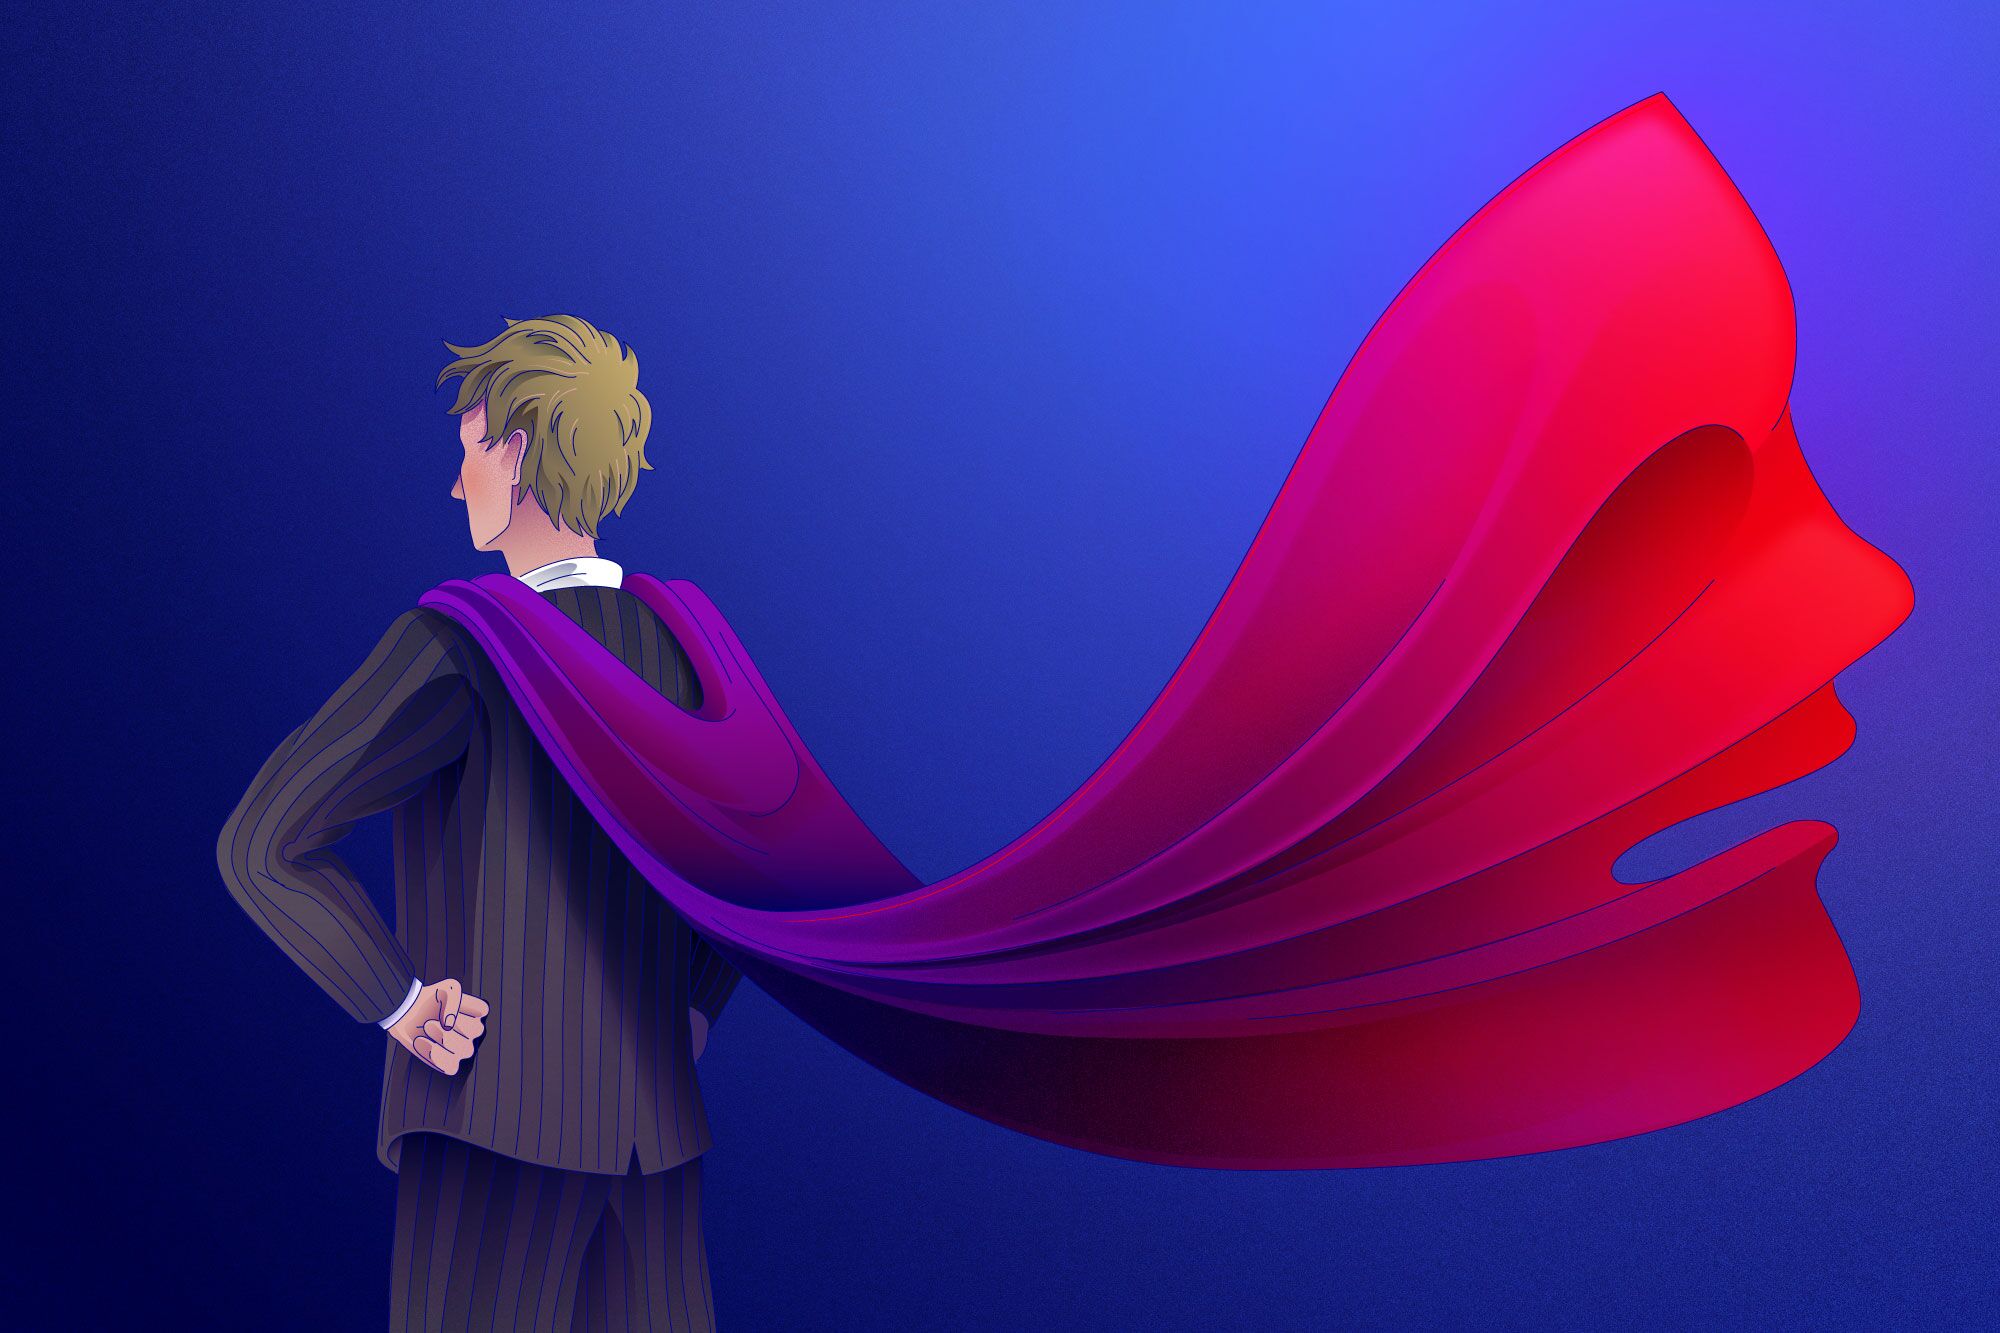 Illustration of talent agent wearing superhero cape with female silhouette